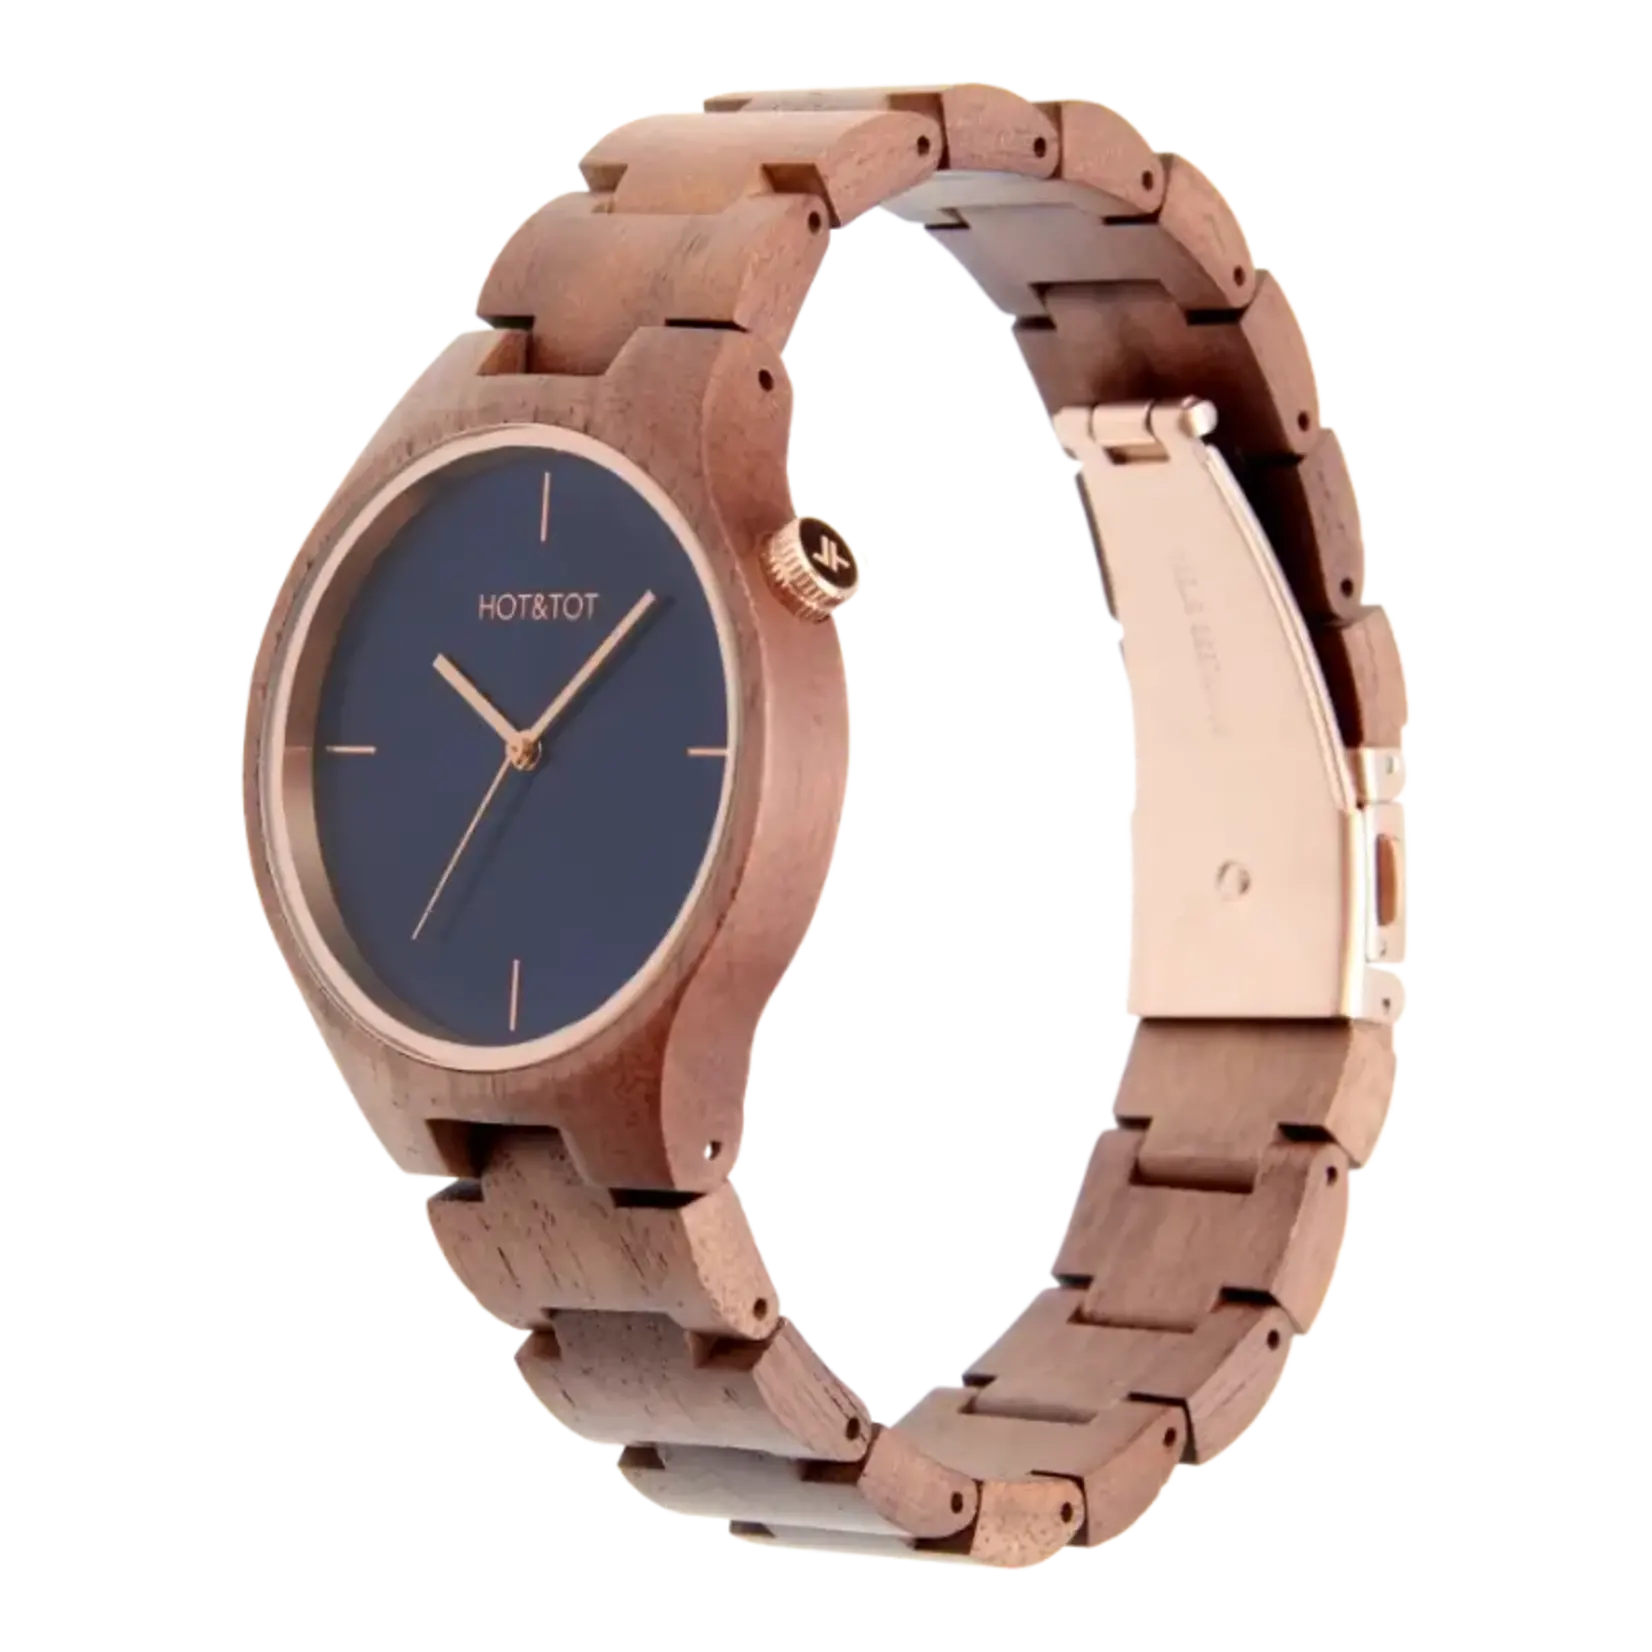 Hot + Tot Sustainable Wood Watch - Bixie